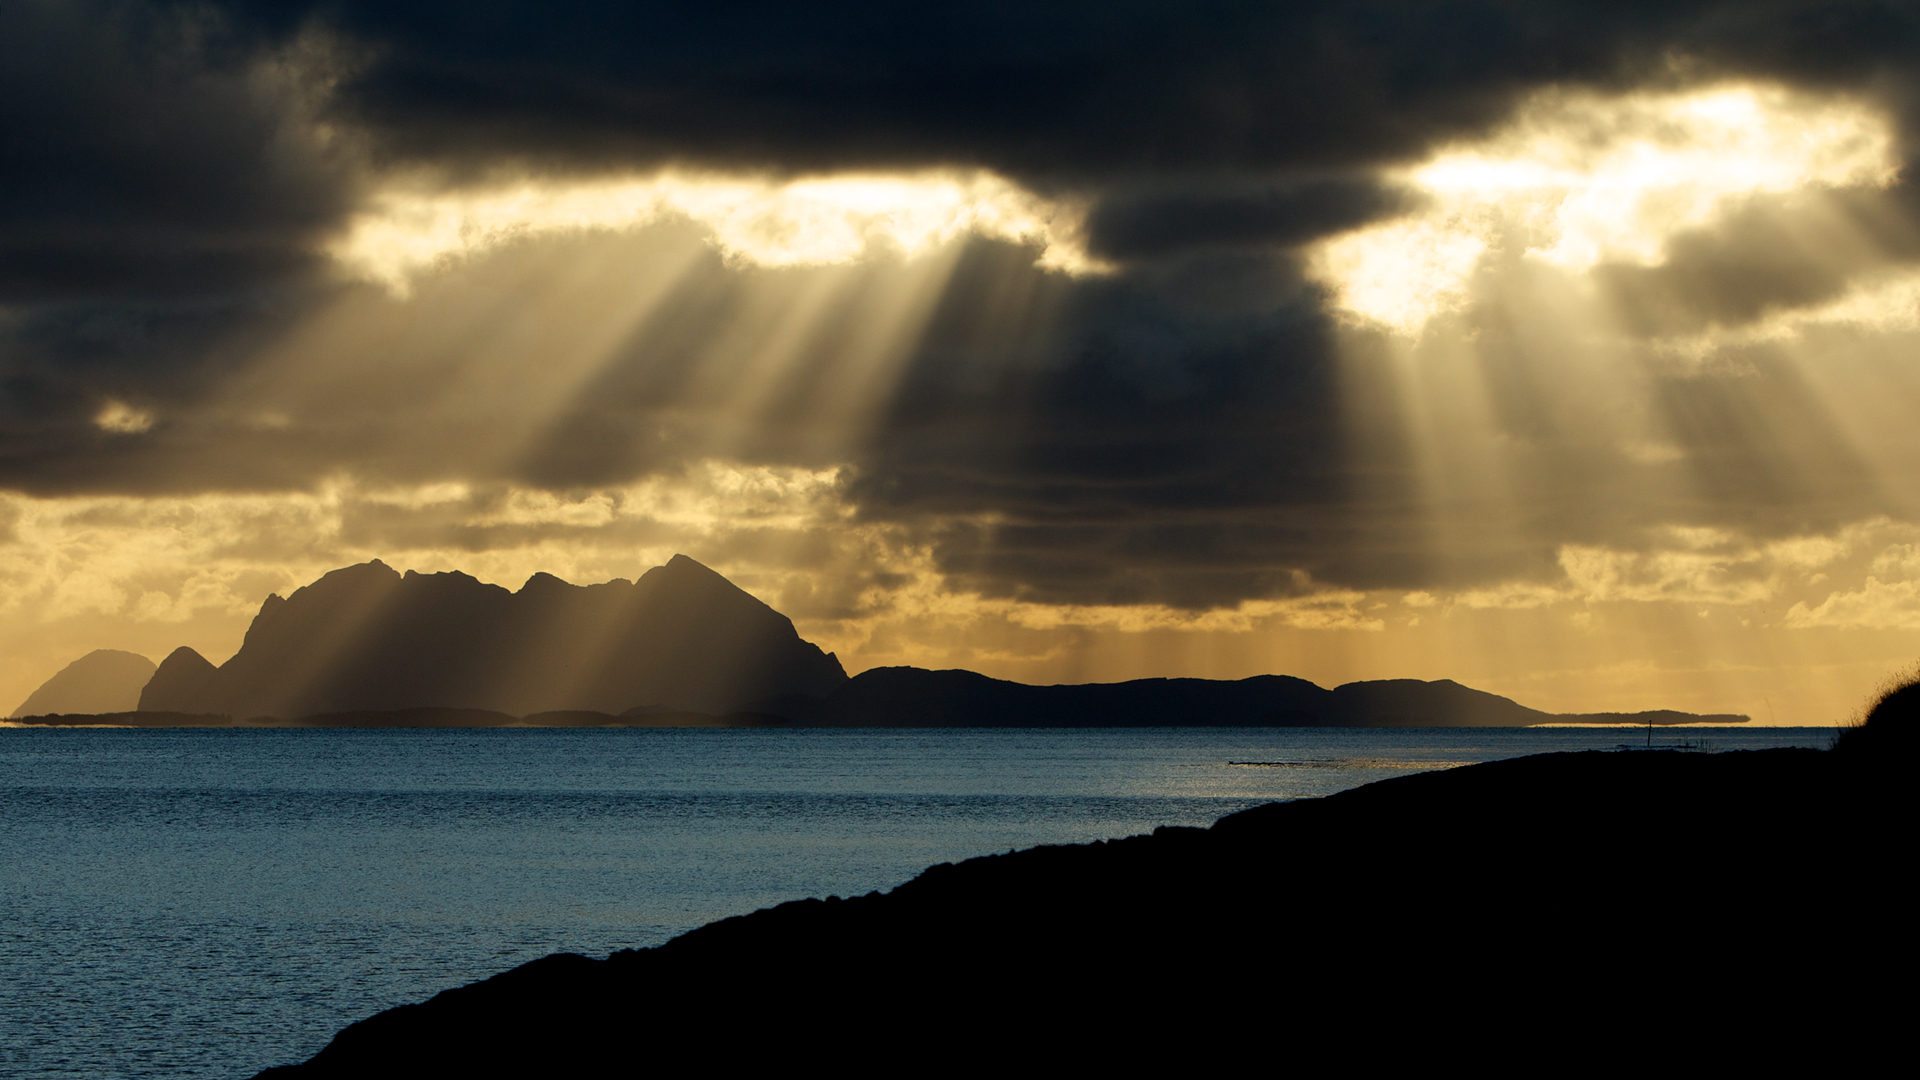 landscapes, Bay, Sea, Ocean, Fjord, Clouds, Sunset, Sunrise, Sunlight, Beams, Rays, Mountains Wallpaper